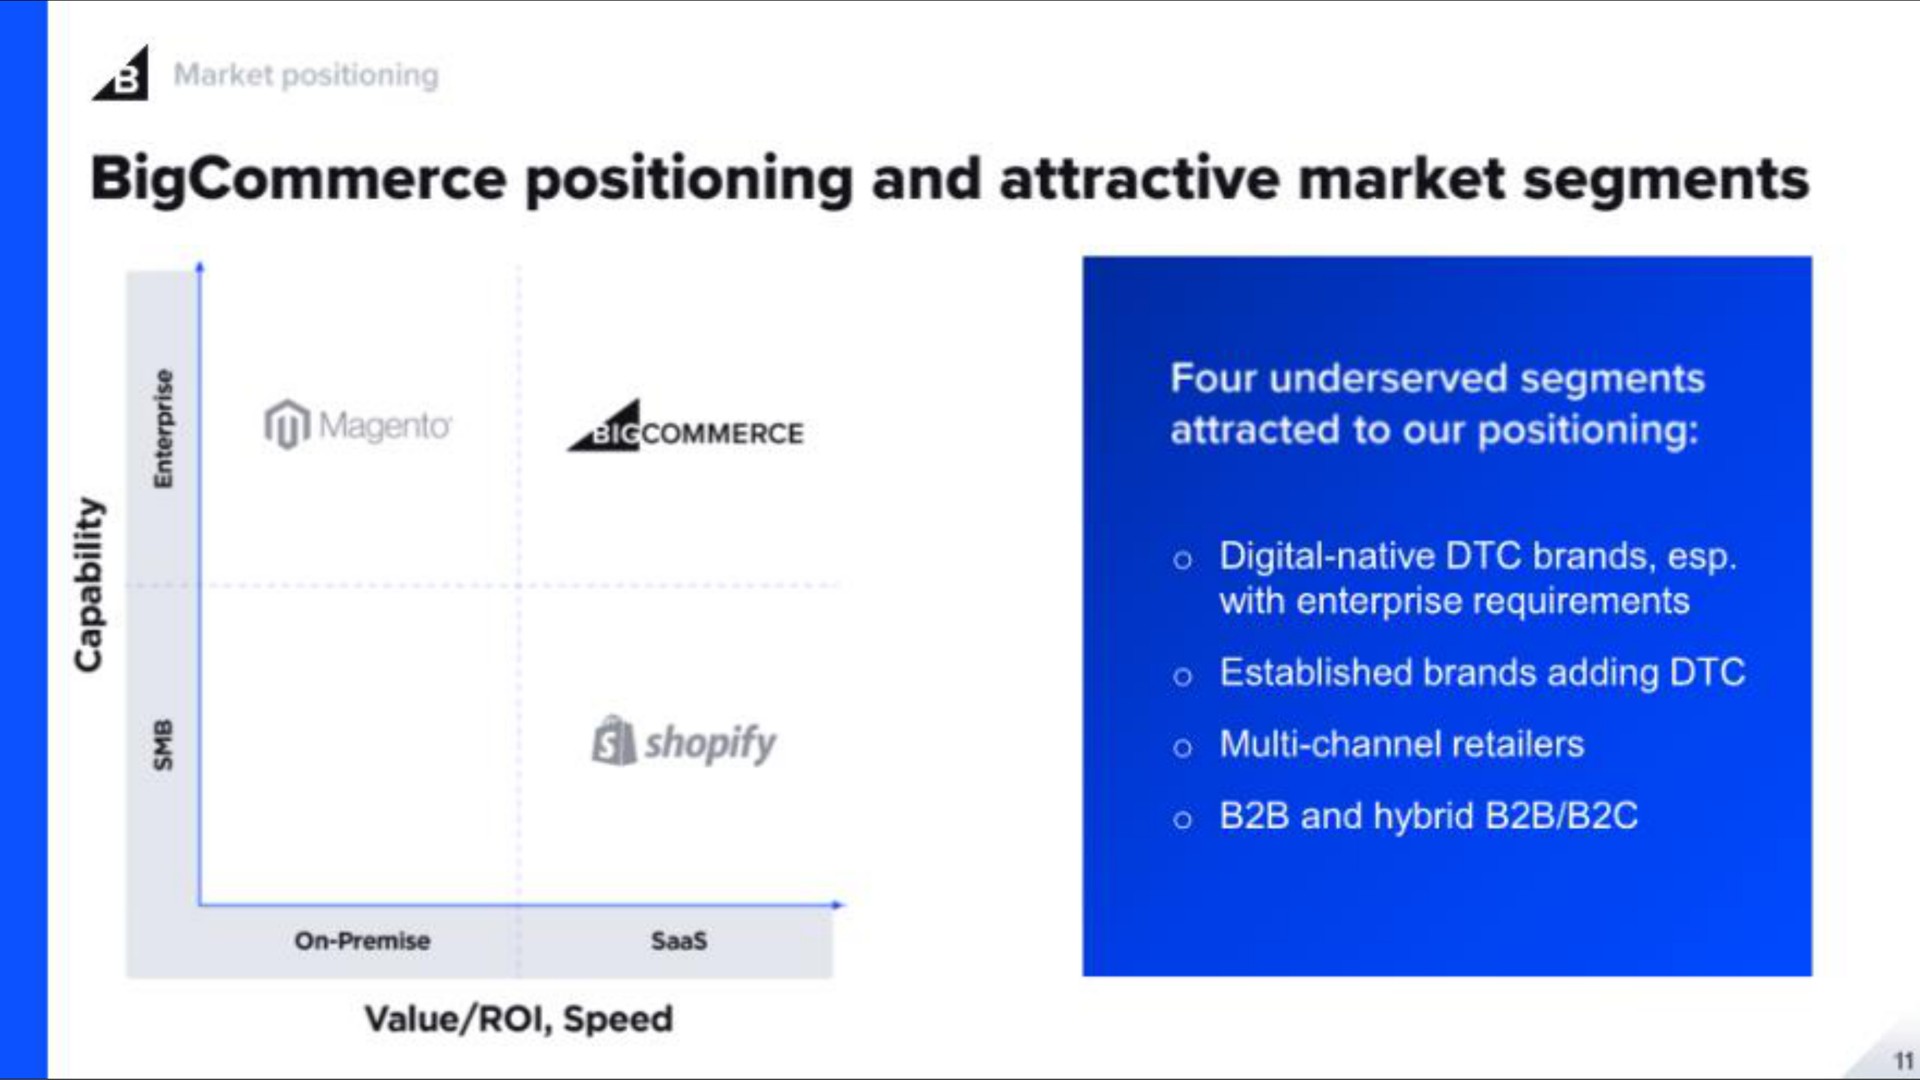 a positioning and attractive market segments | BigCommerce